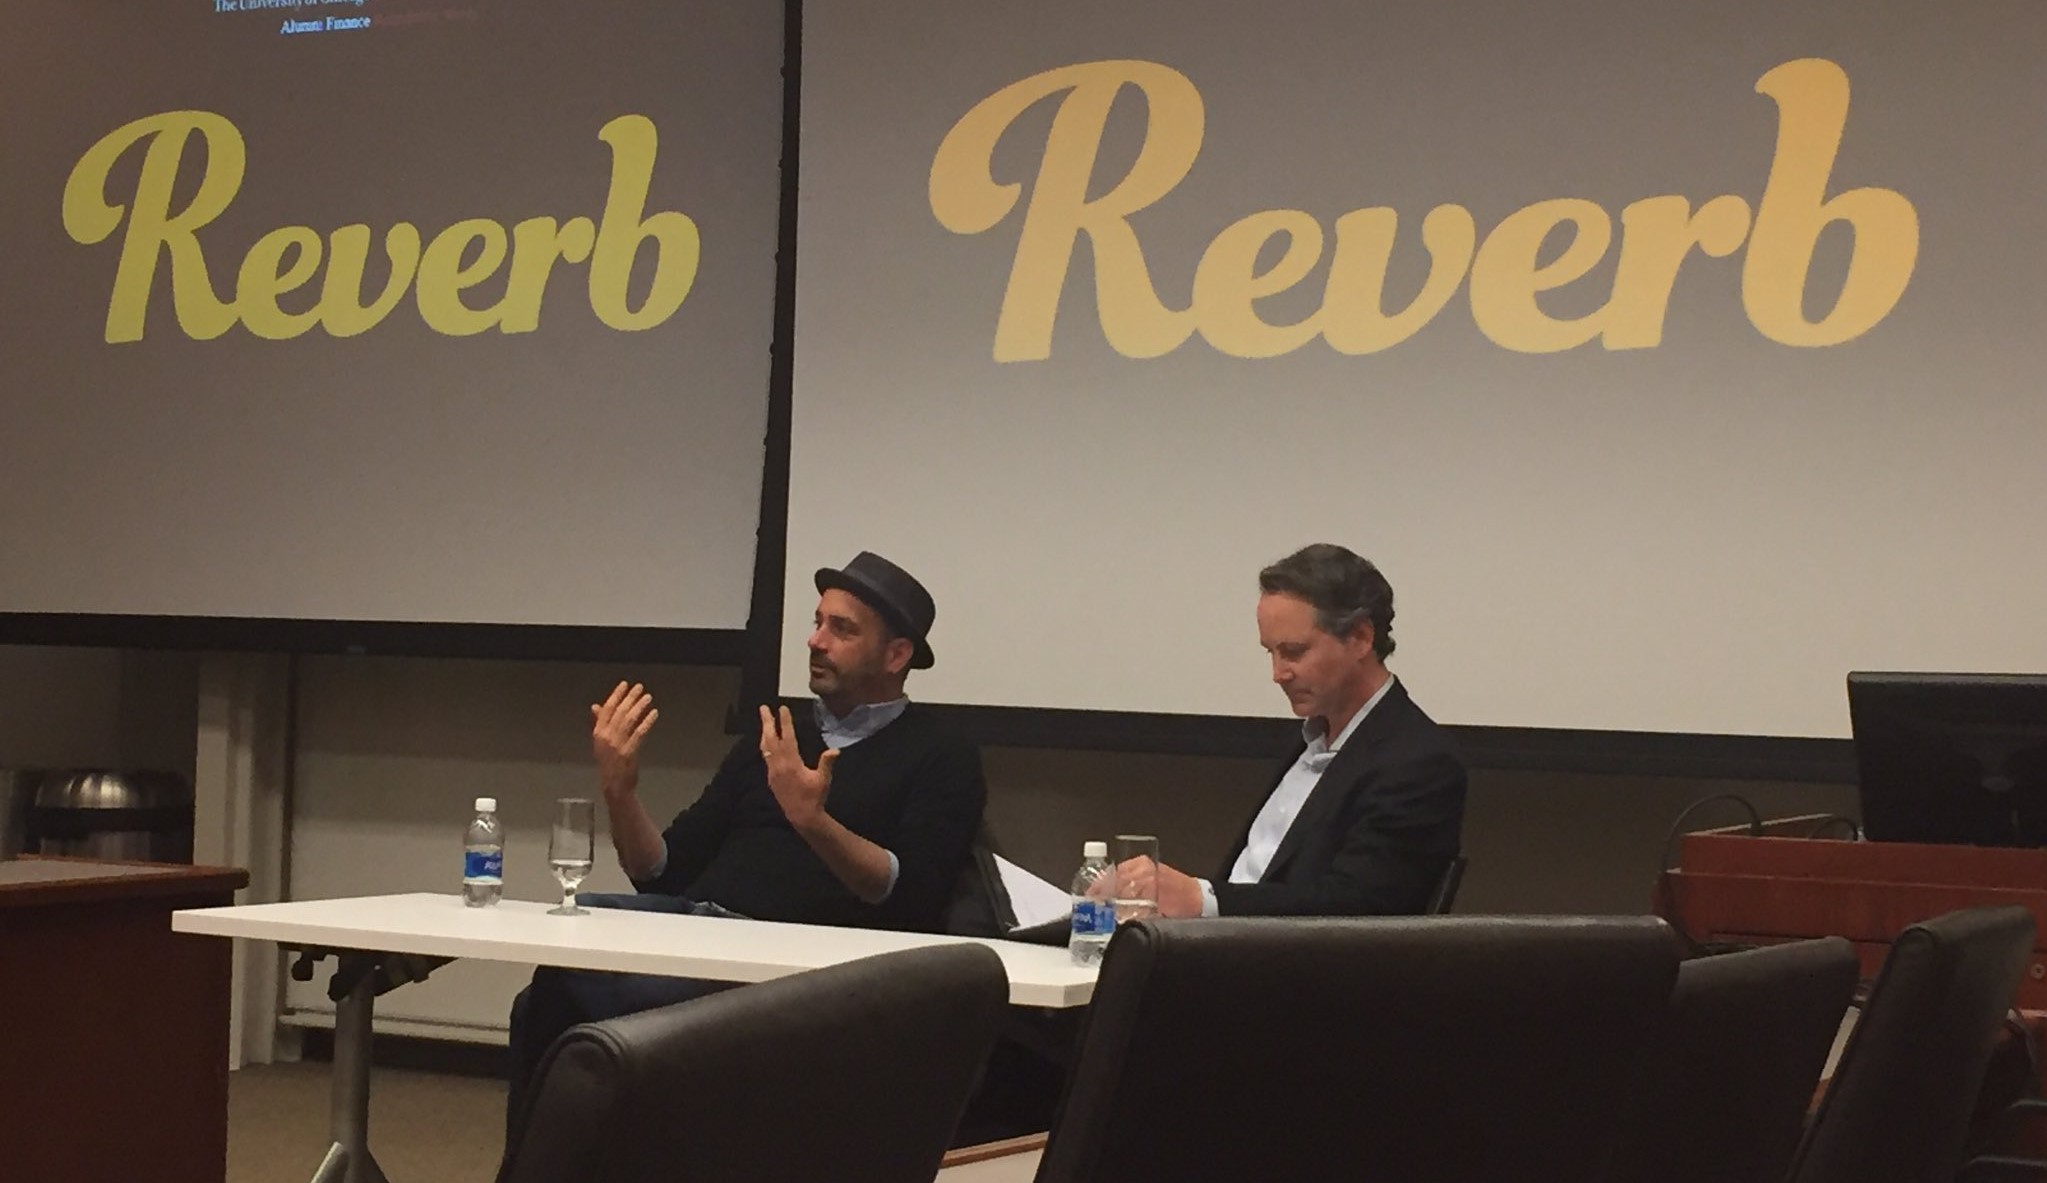 Reverb founder and CEO speak in a meetup event